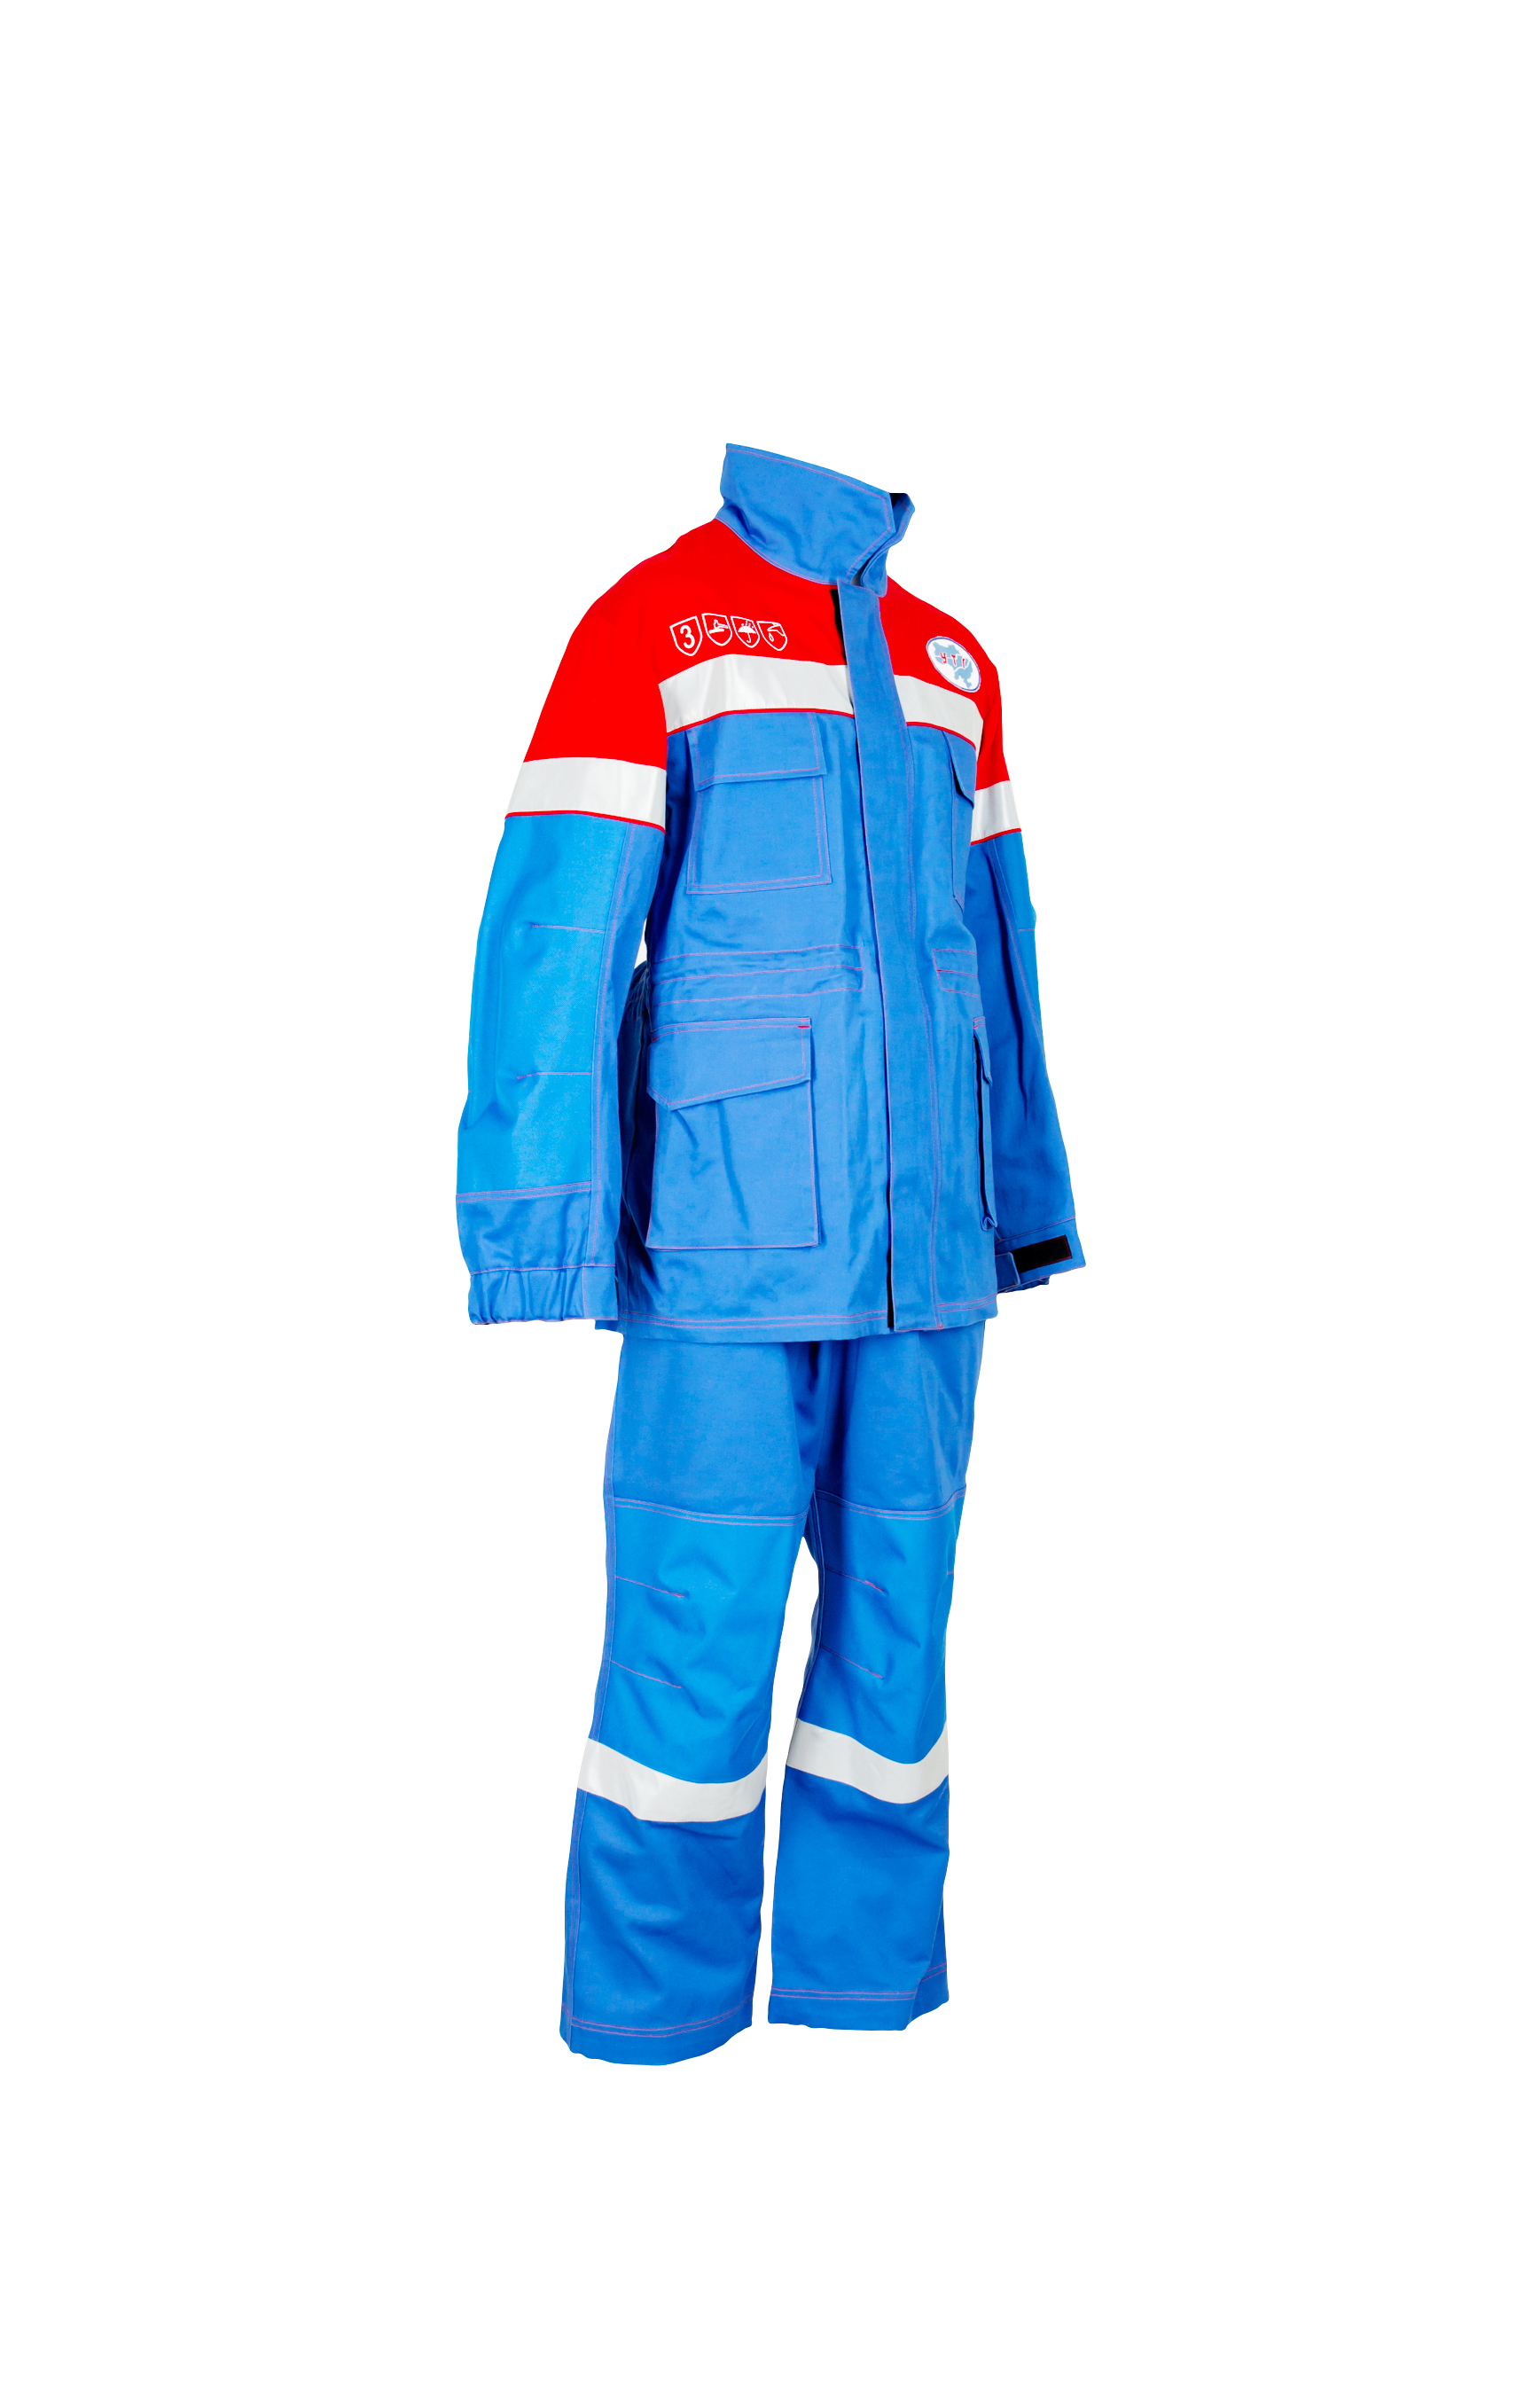 Police, pilots, oil and gas workers uniforms, medical cloth, firefighters wear